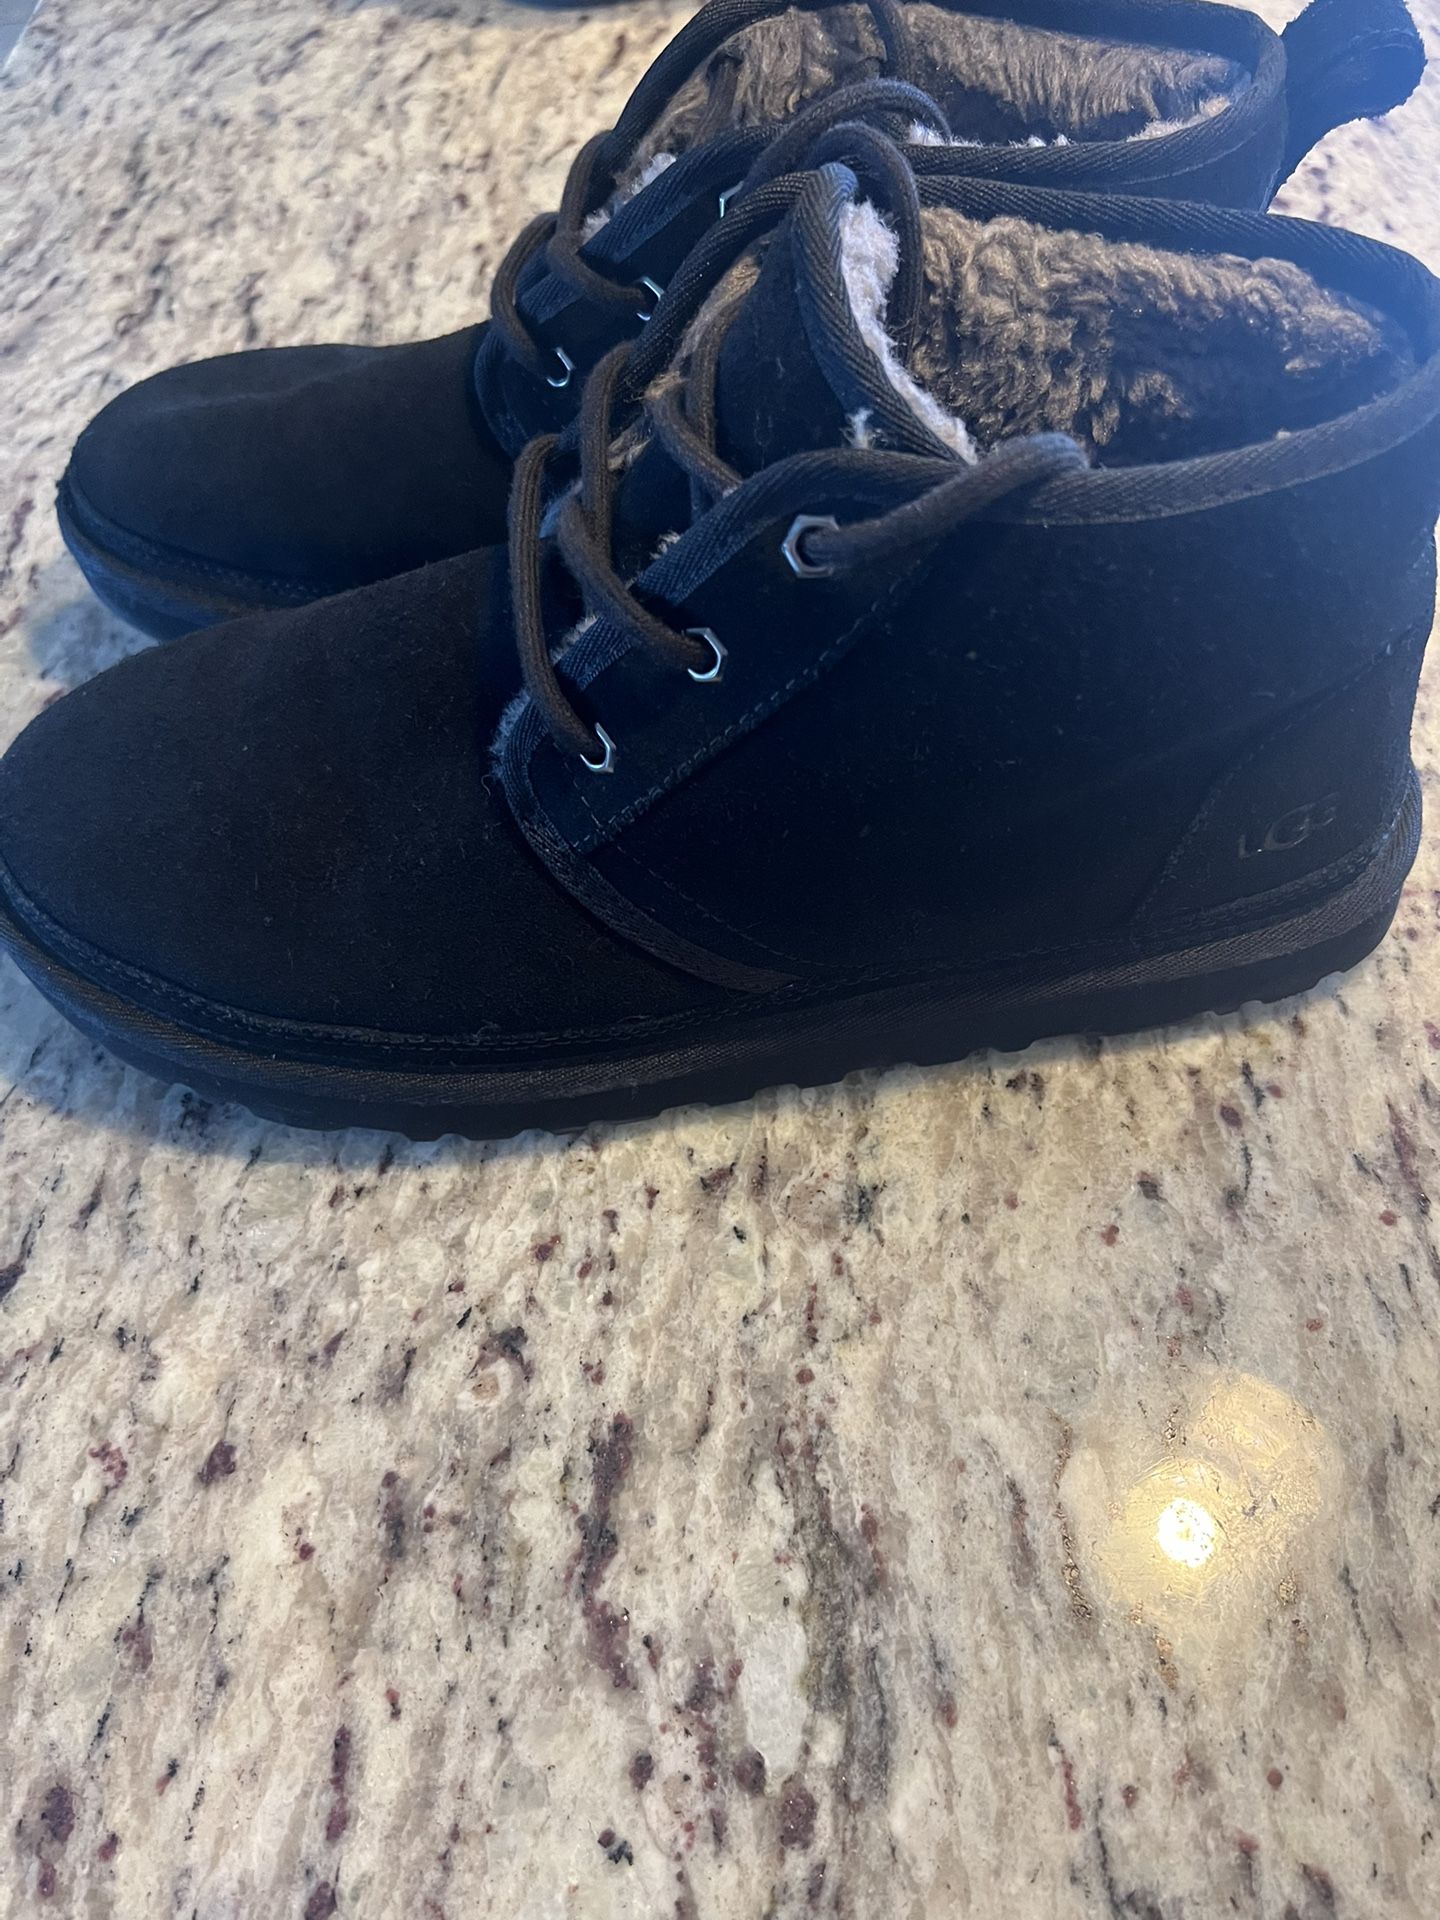 Uggs Size 10.5 Like New